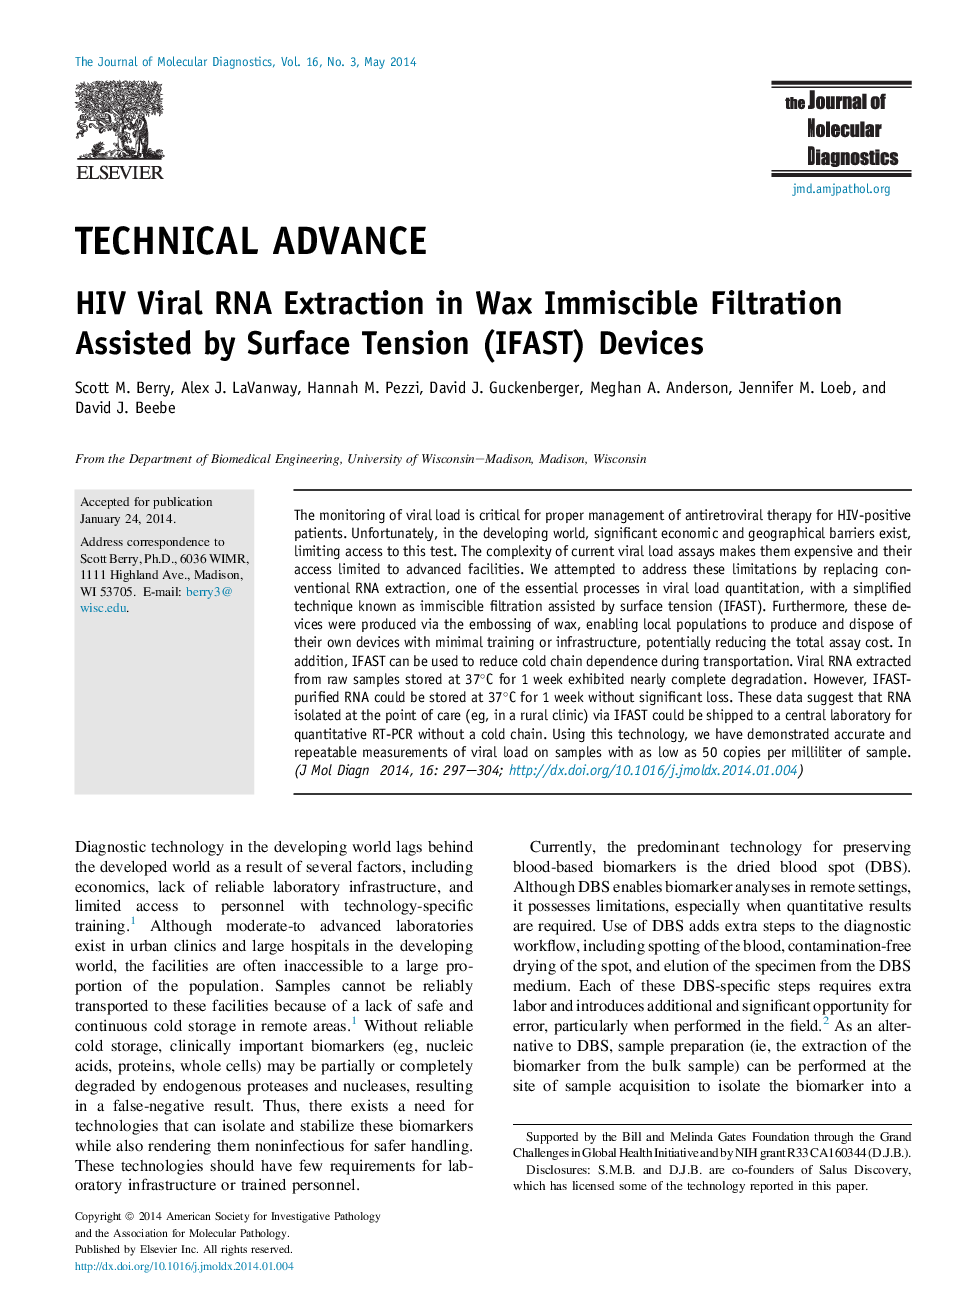 Technical advanceHIV Viral RNA Extraction in Wax Immiscible Filtration Assisted by Surface Tension (IFAST) Devices